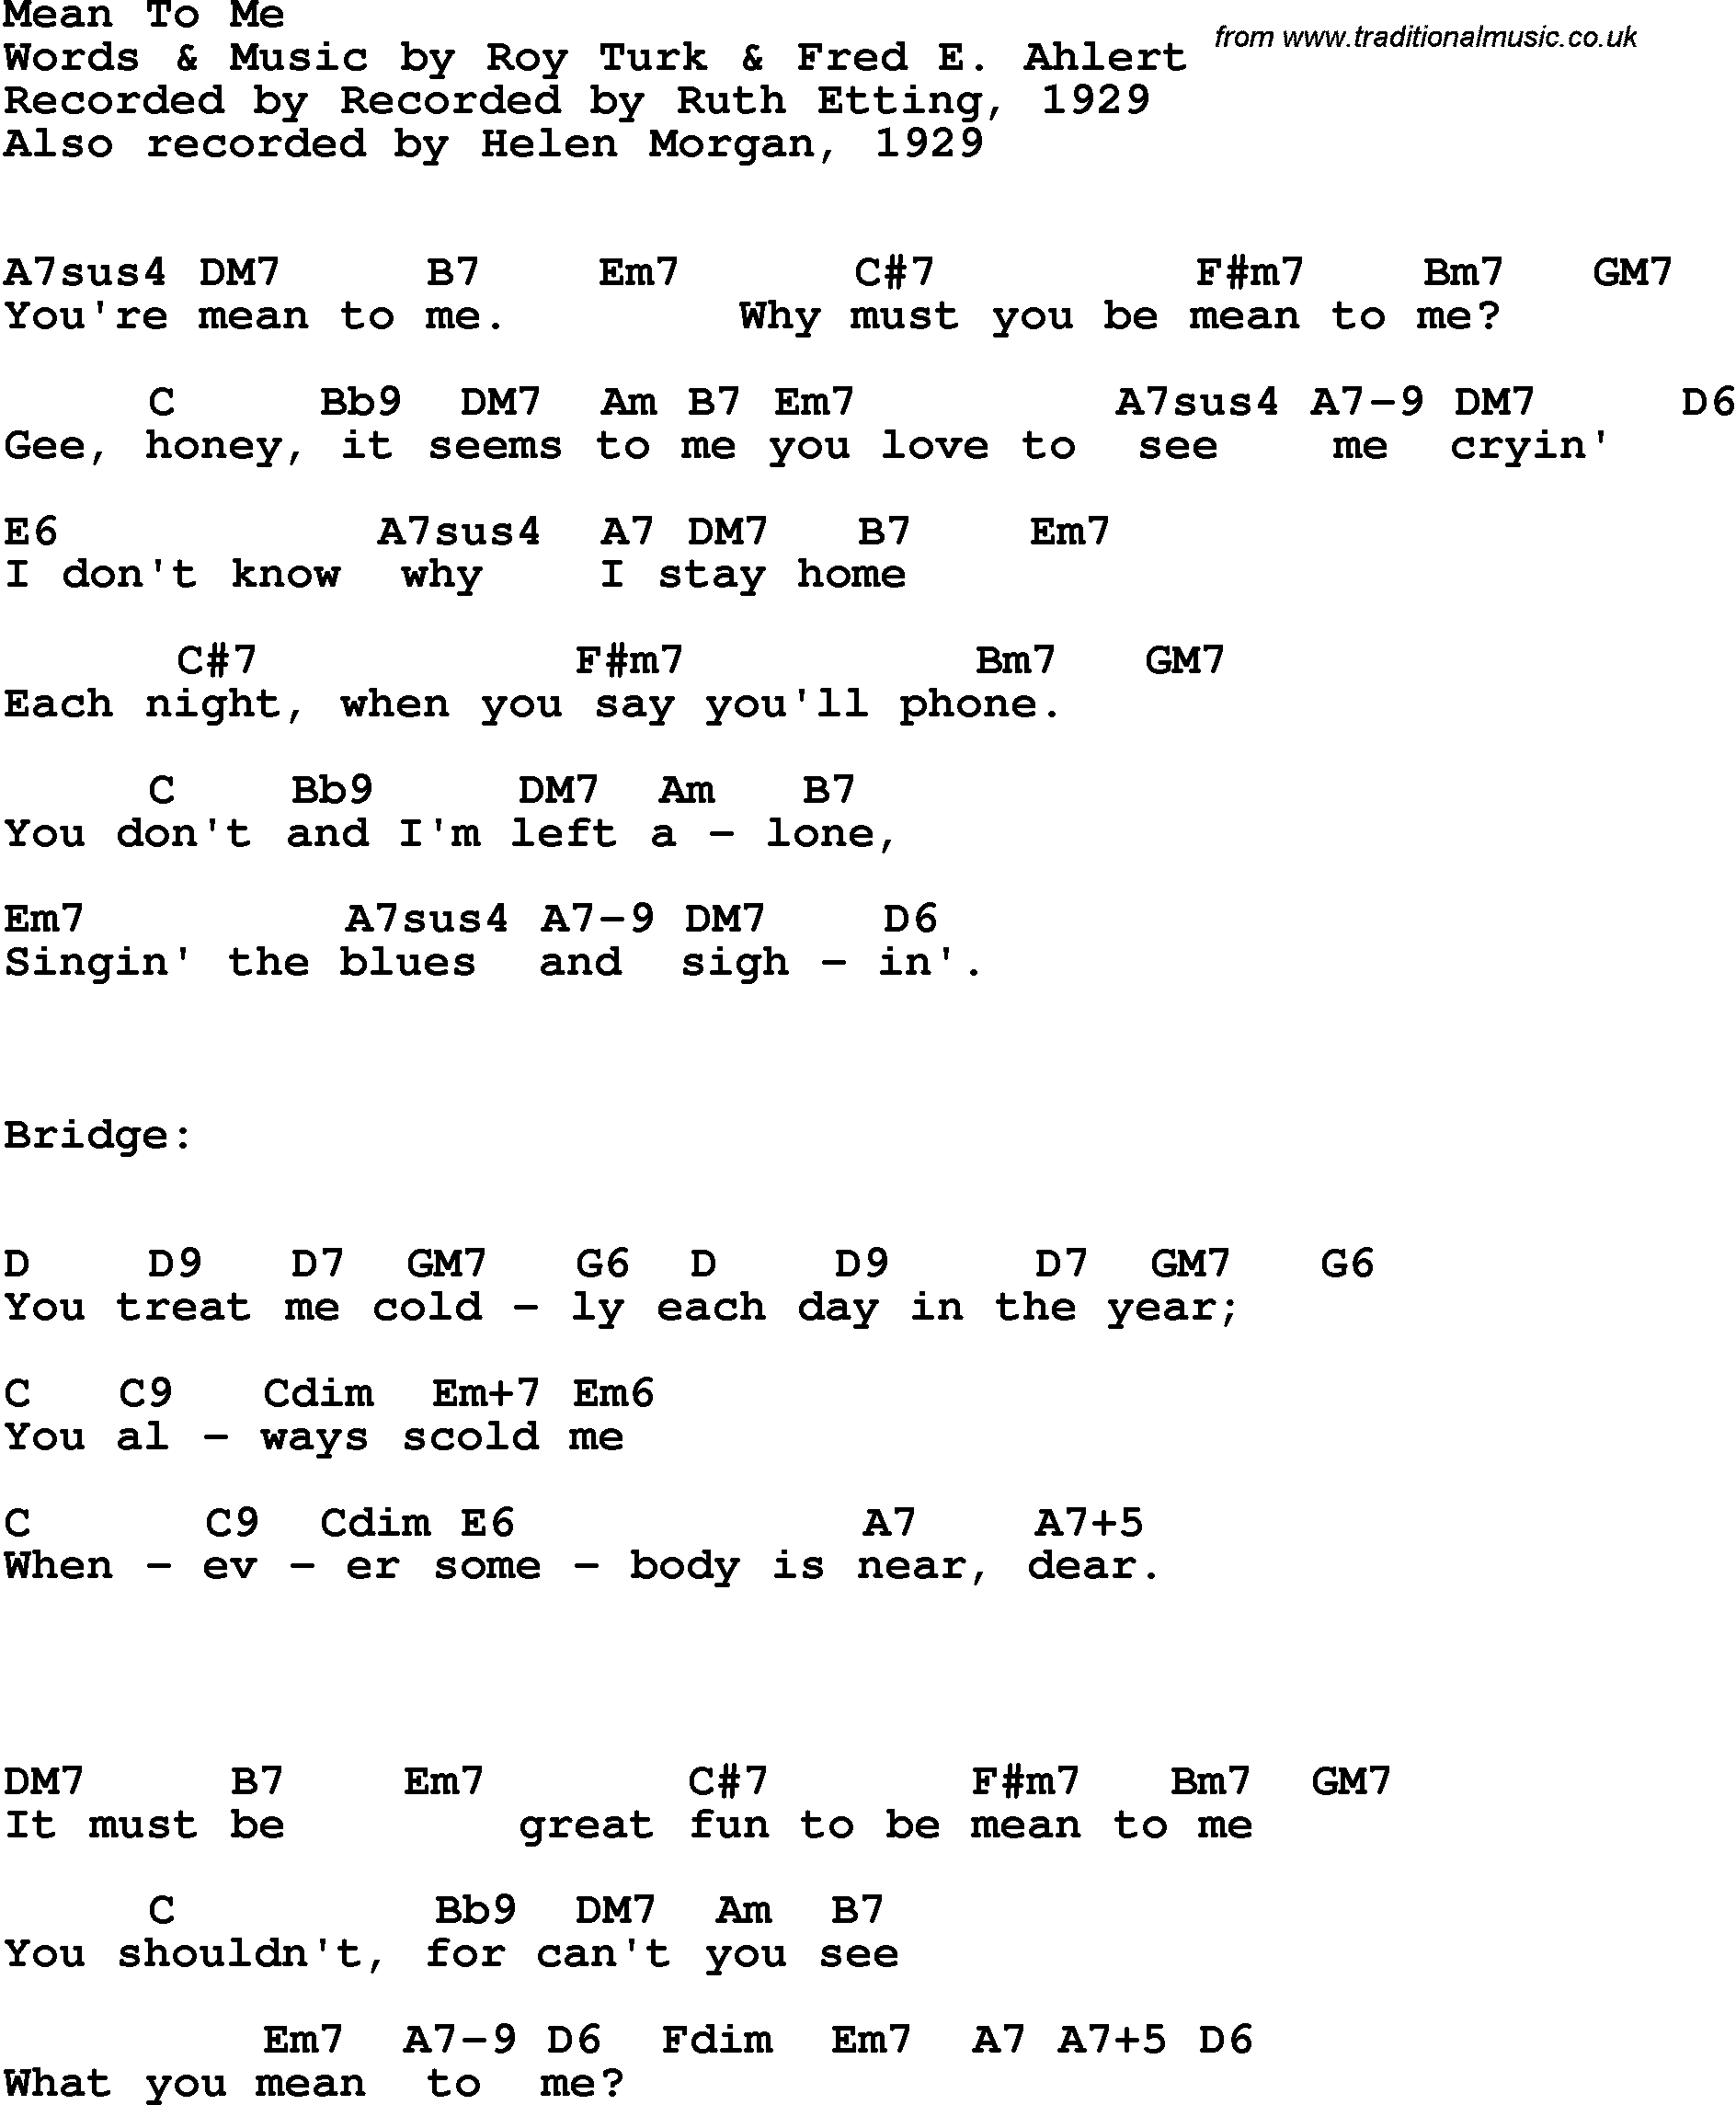 Song Lyrics with guitar chords for Mean To Me - Ruth Etting, 1929